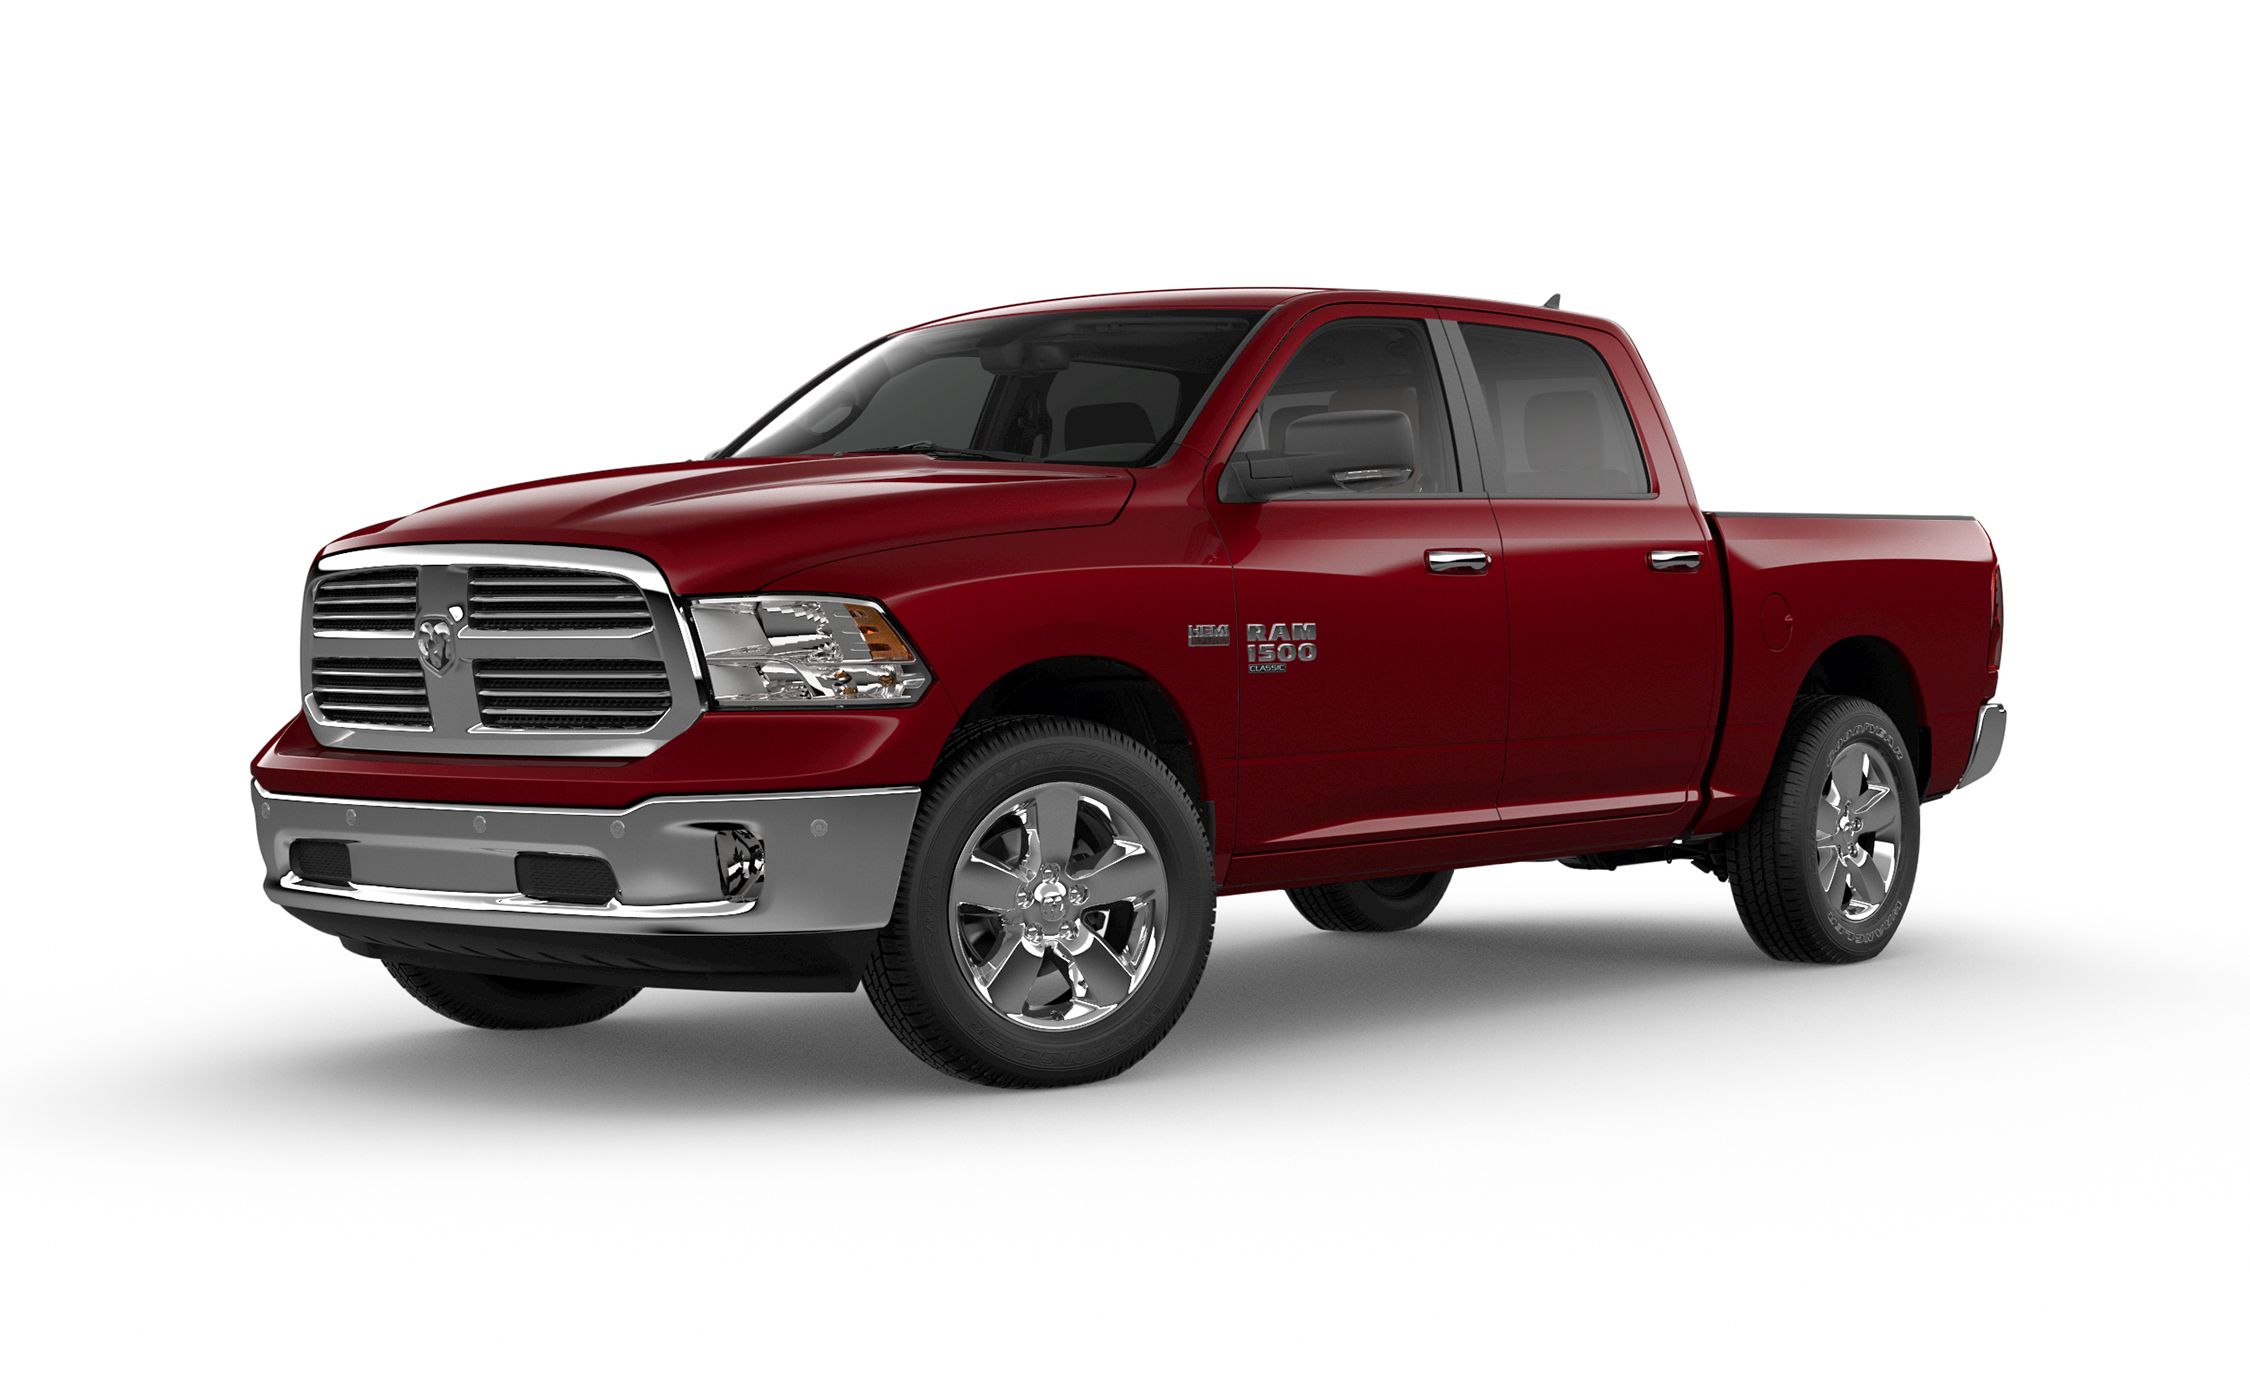 Two Flavors of 2019 Ram 1500: New New and Old New